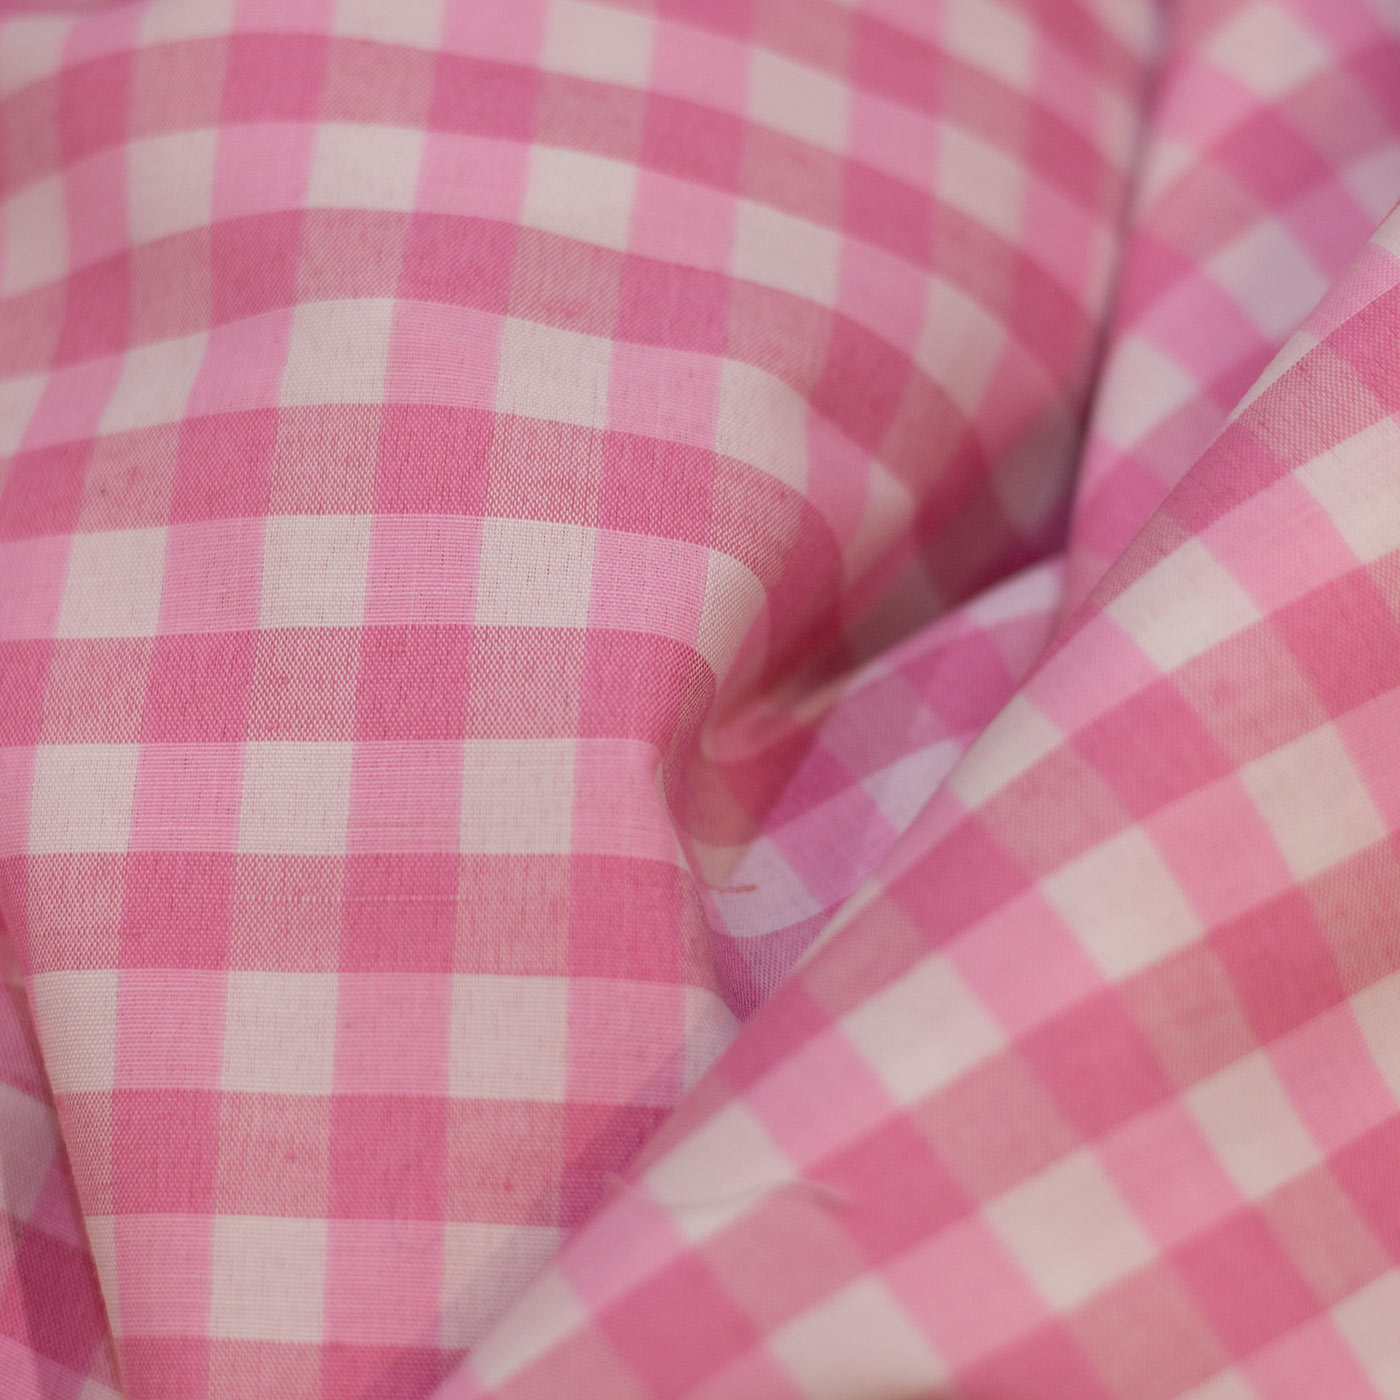 Pink Check Gingham Fabric